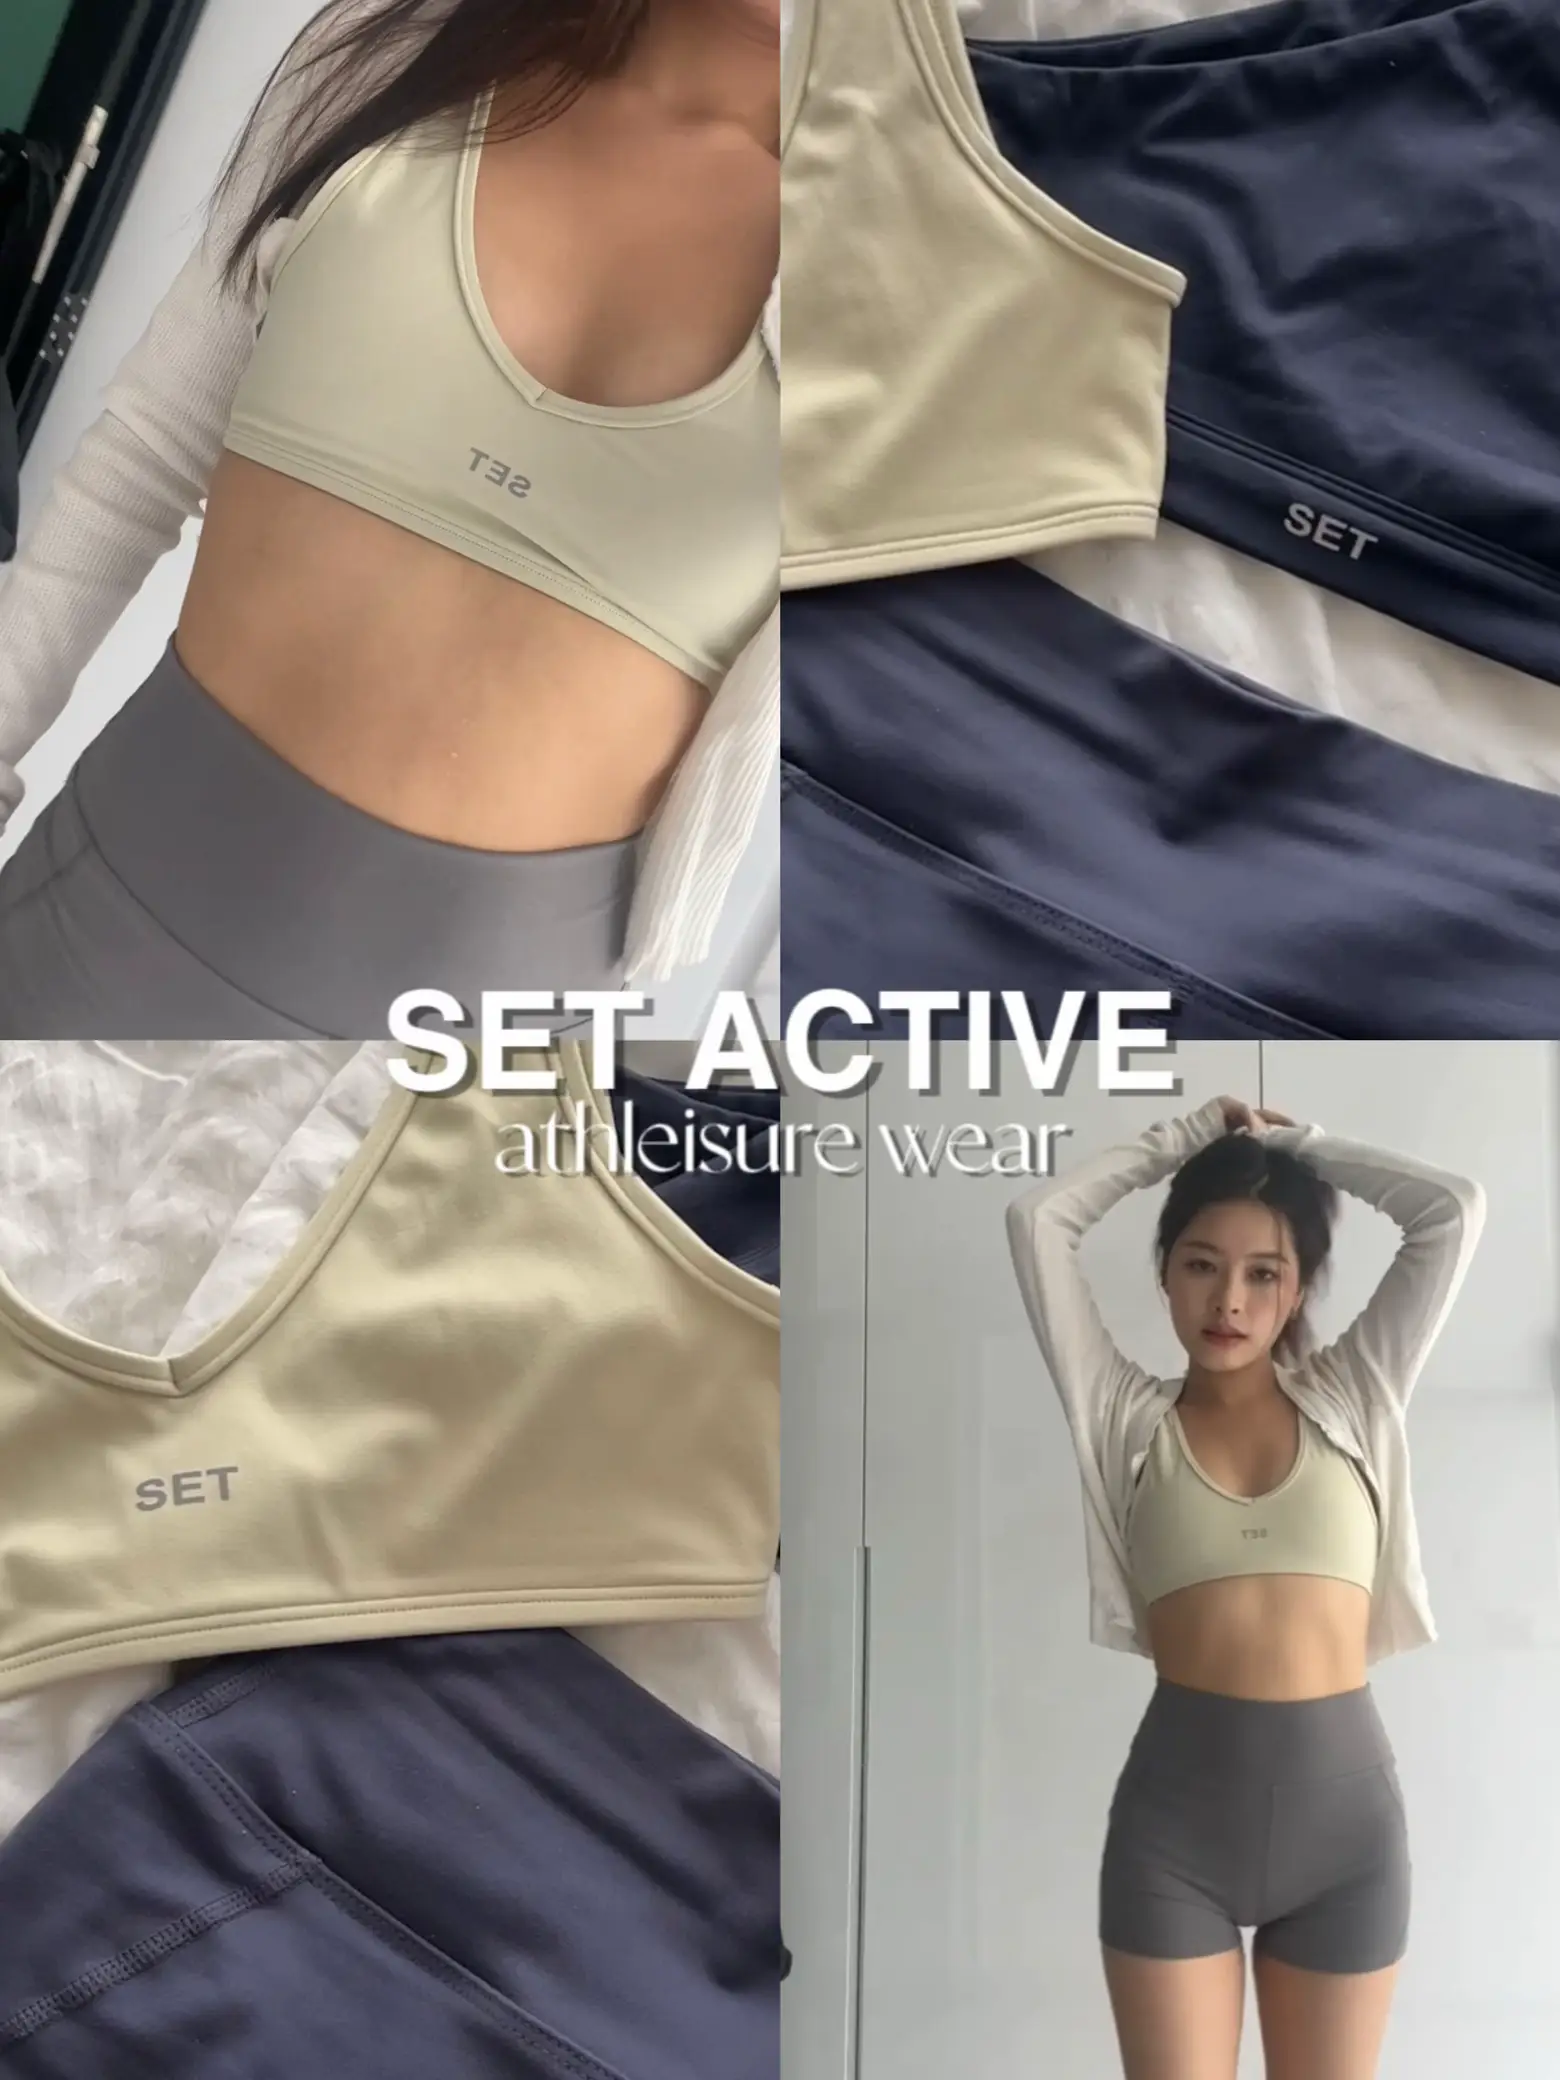 my favourite active wear brand atm!, Gallery posted by francesca